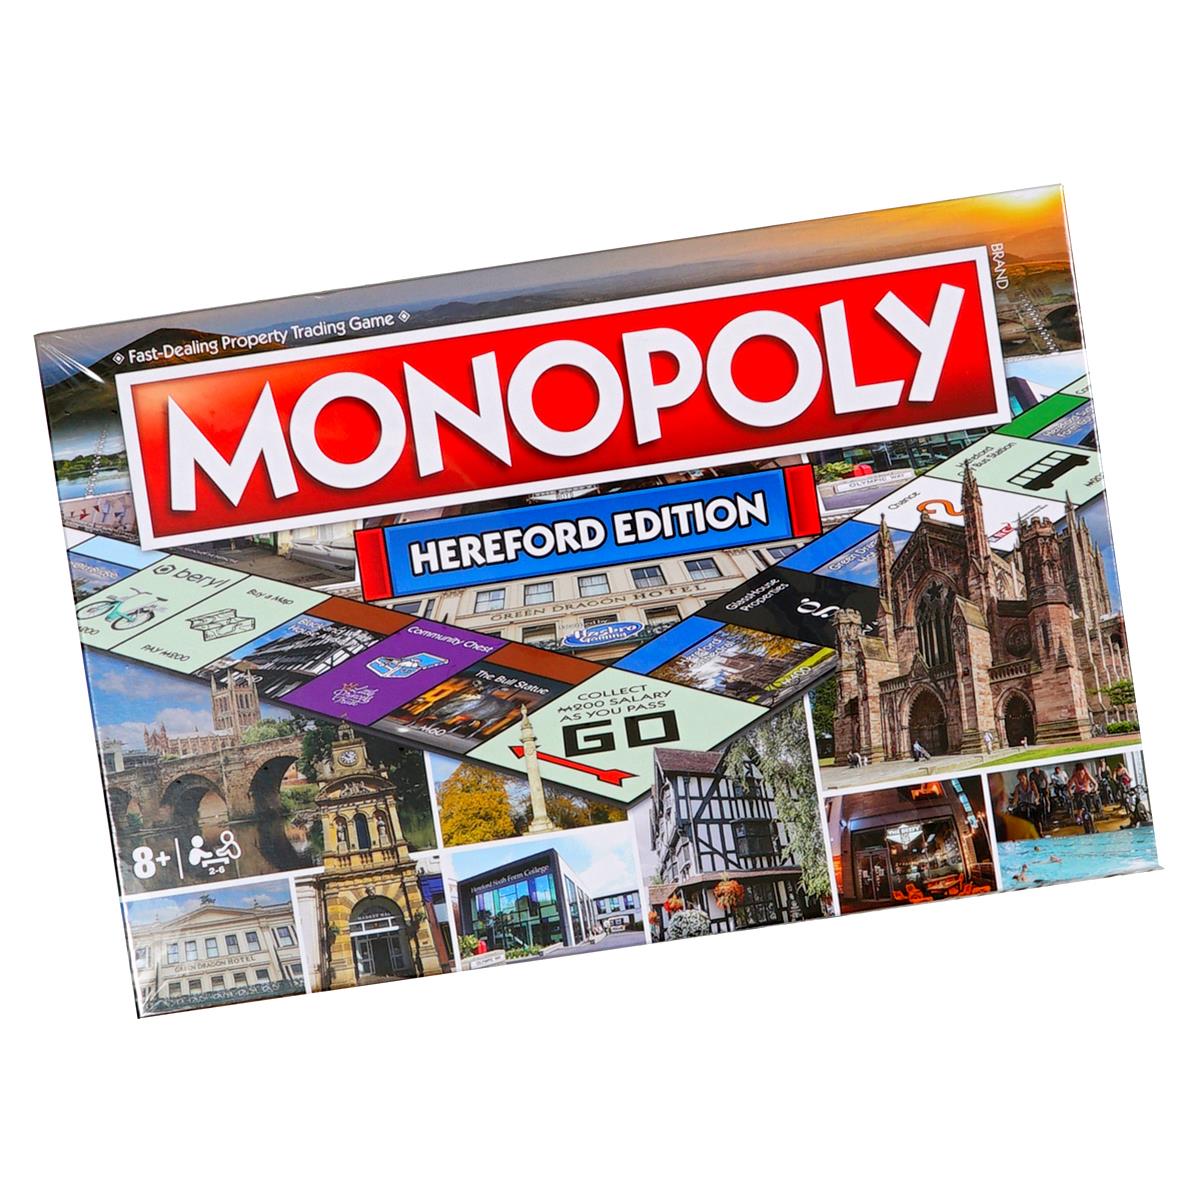 Which businesses influenced spaces in the Hereford Monopoly game?